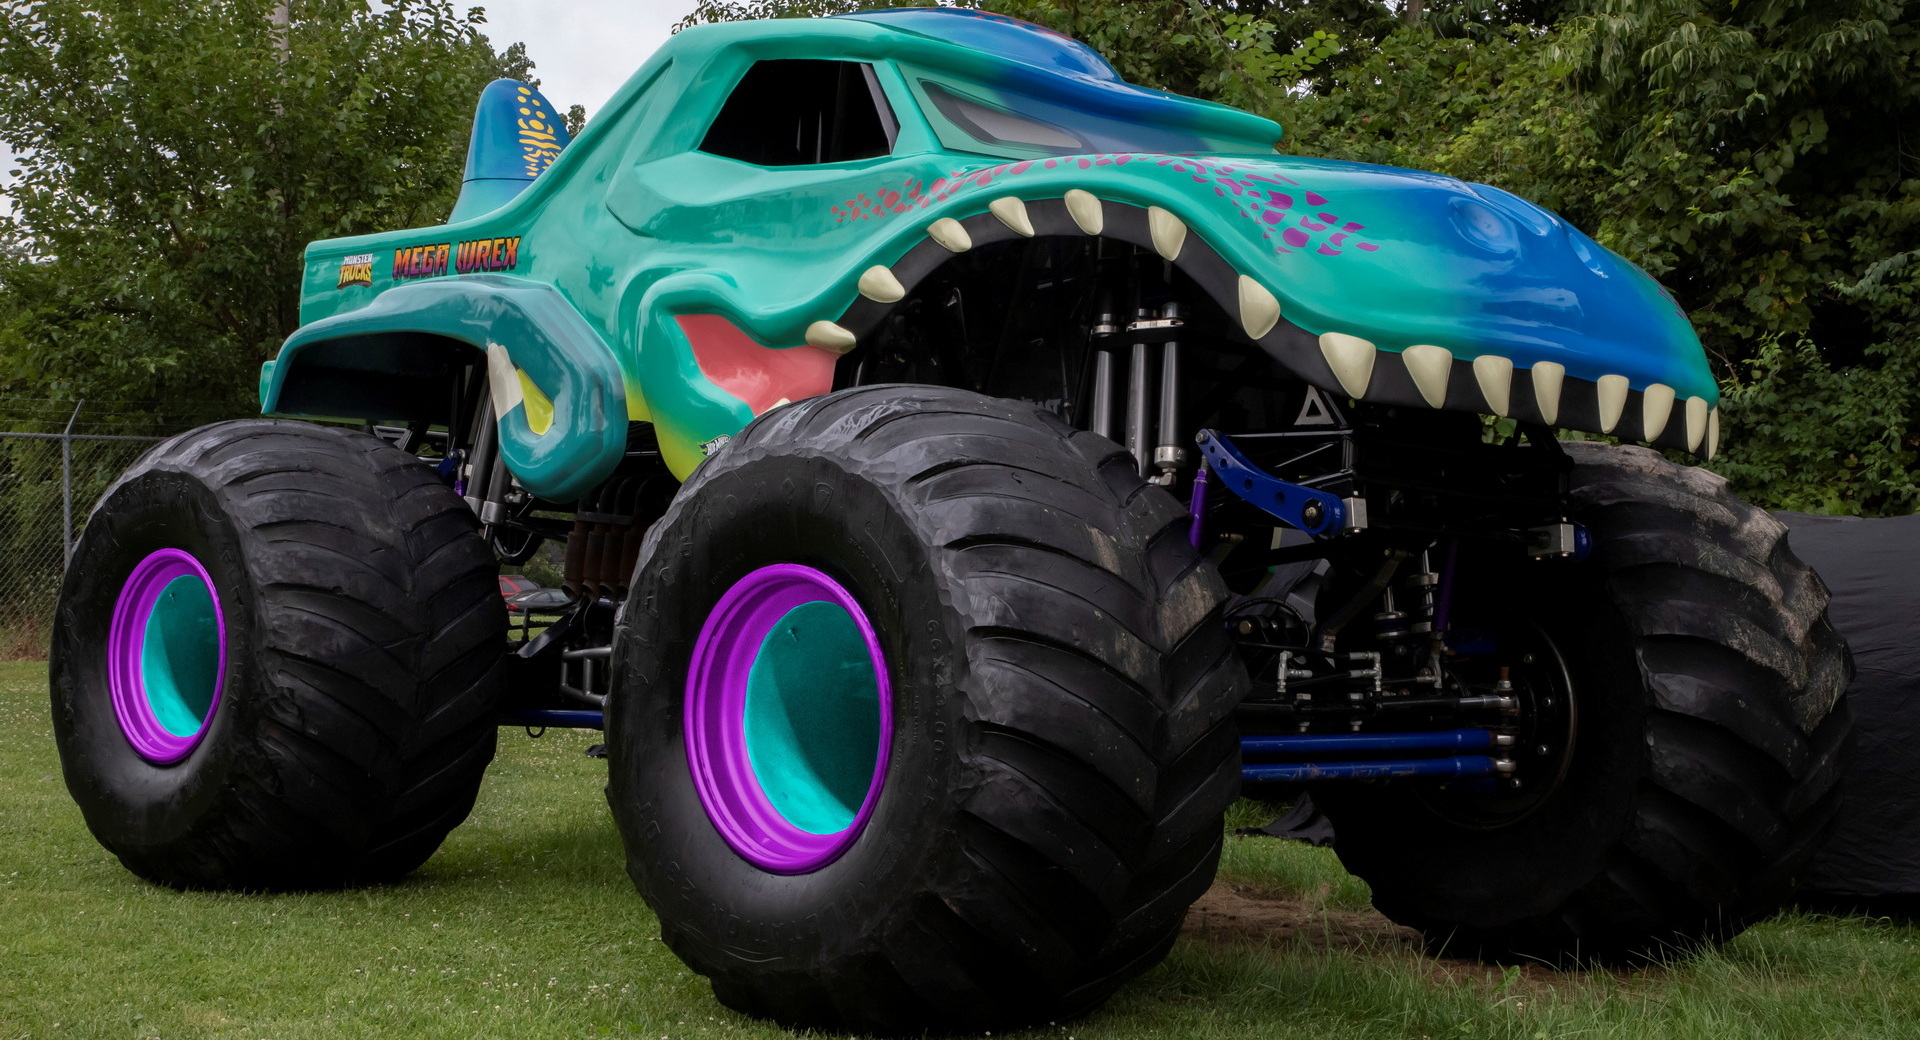 Hot Wheels Introduces New 12-Foot Tall, 1,800 HP Monster Truck: Mega Wrex | Carscoops